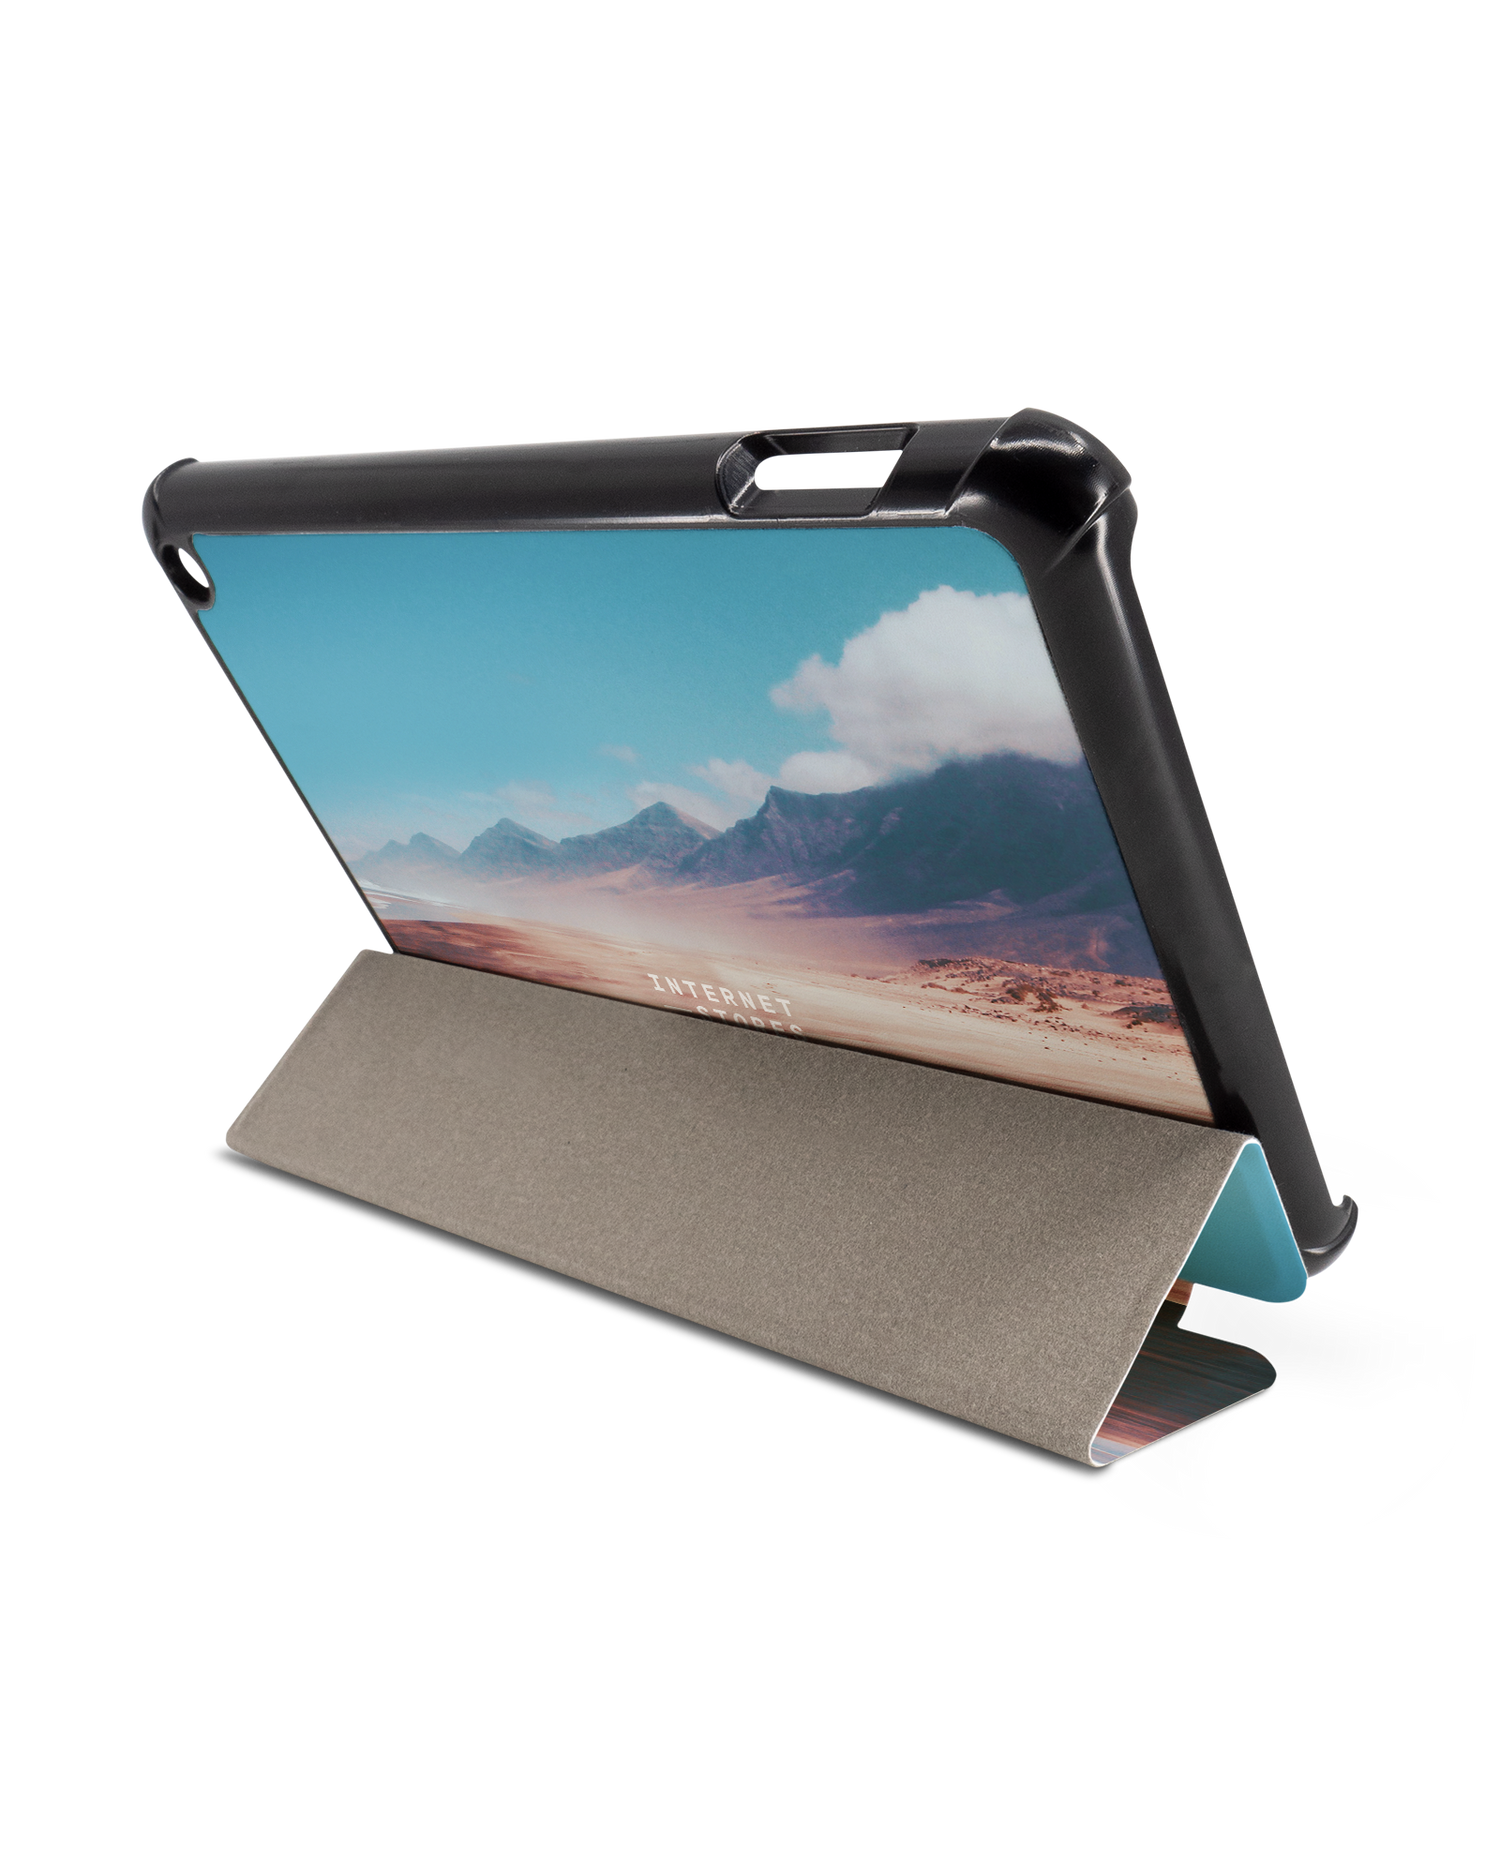 Sky Tablet Smart Case for Amazon Fire 7 (2022): Used as Stand